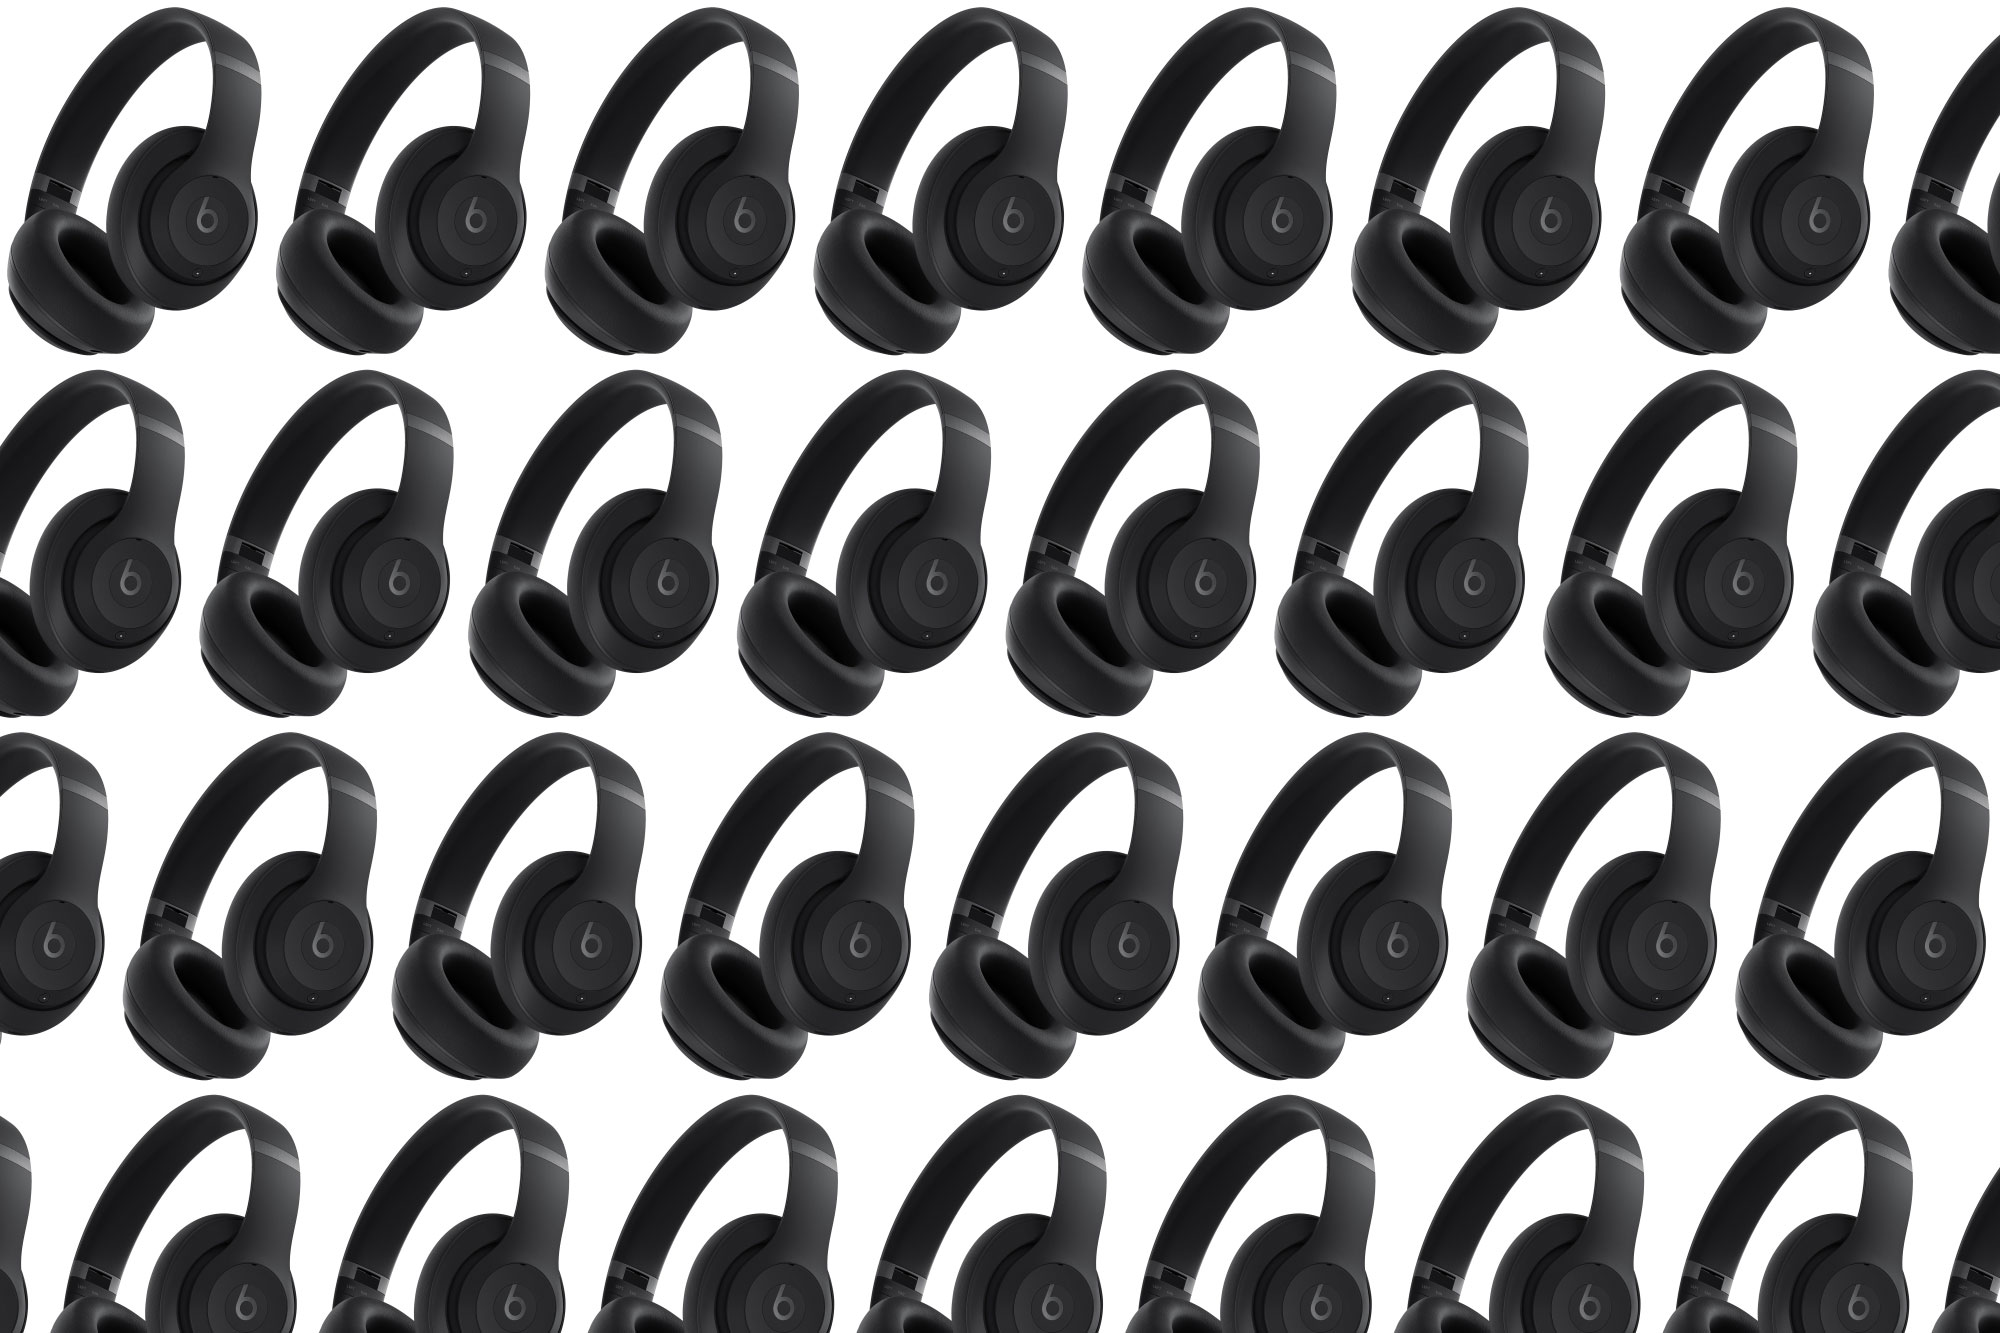 The Beats Studio Pro headphones are down to a lower price Black Friday